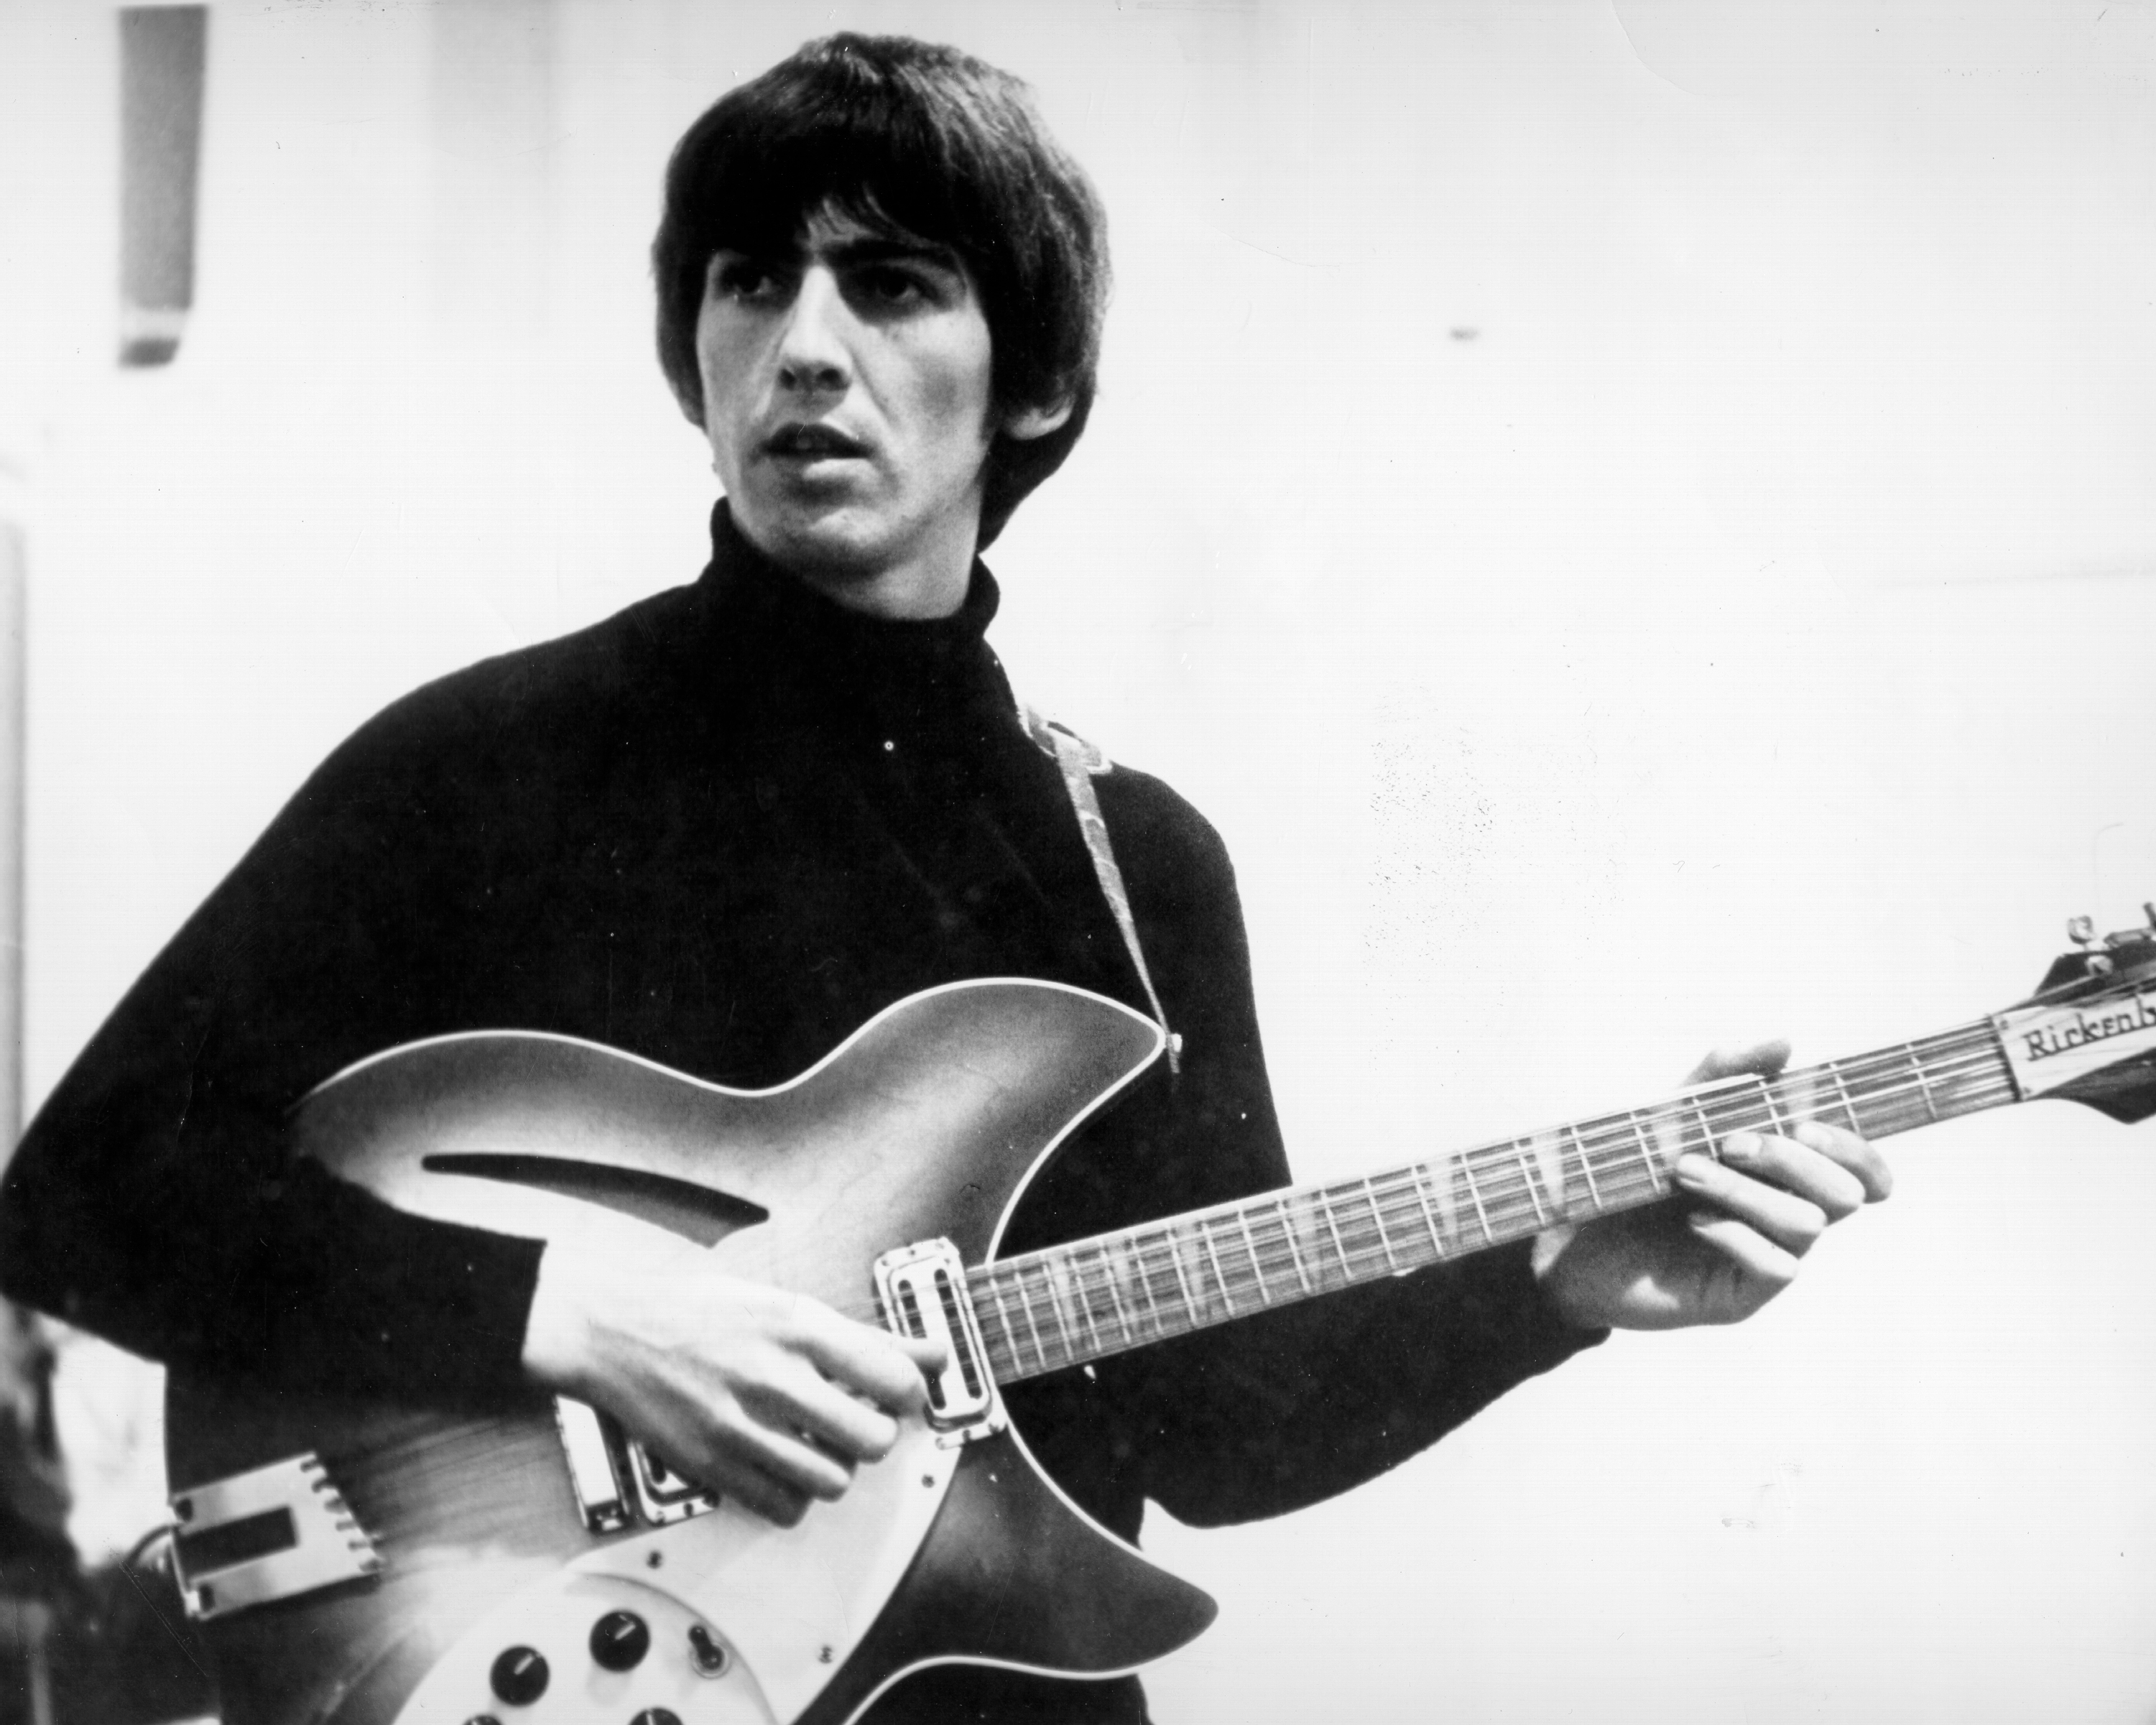 The Beatles' George Harrison during the "Twist and Shout" era